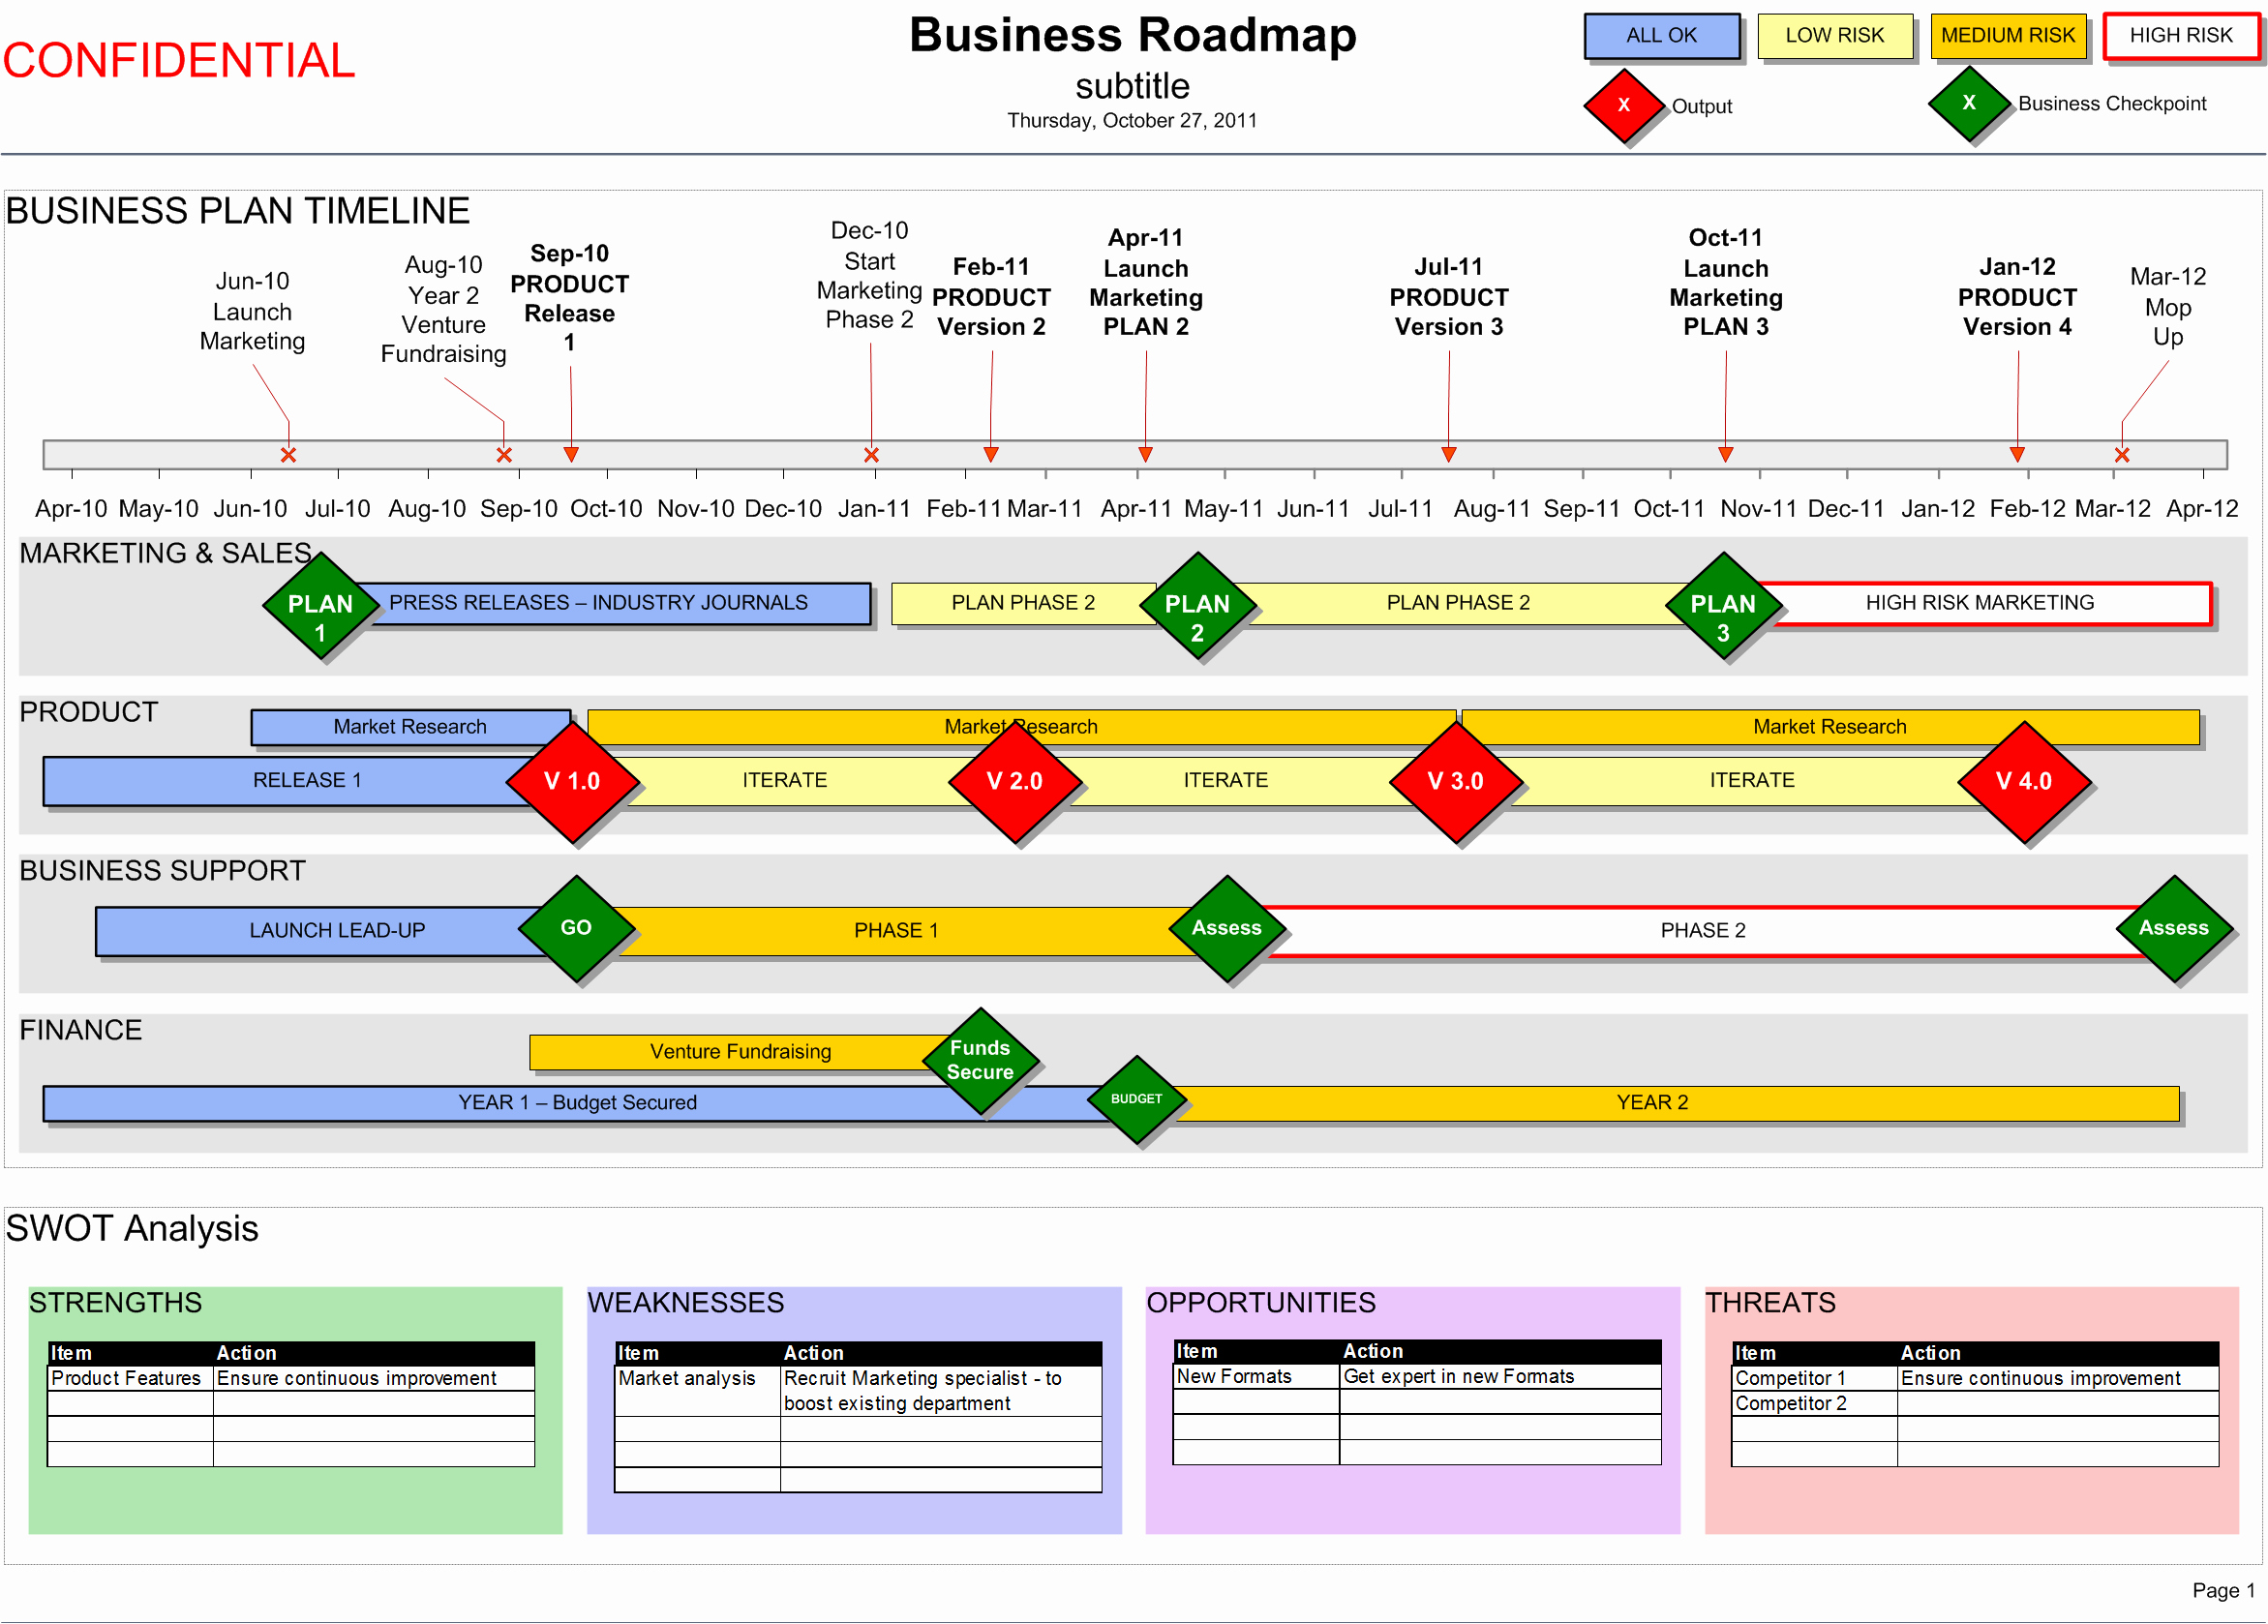 Business Plan Timeline Template Beautiful Business Roadmap with Swot &amp; Timeline Visio Template